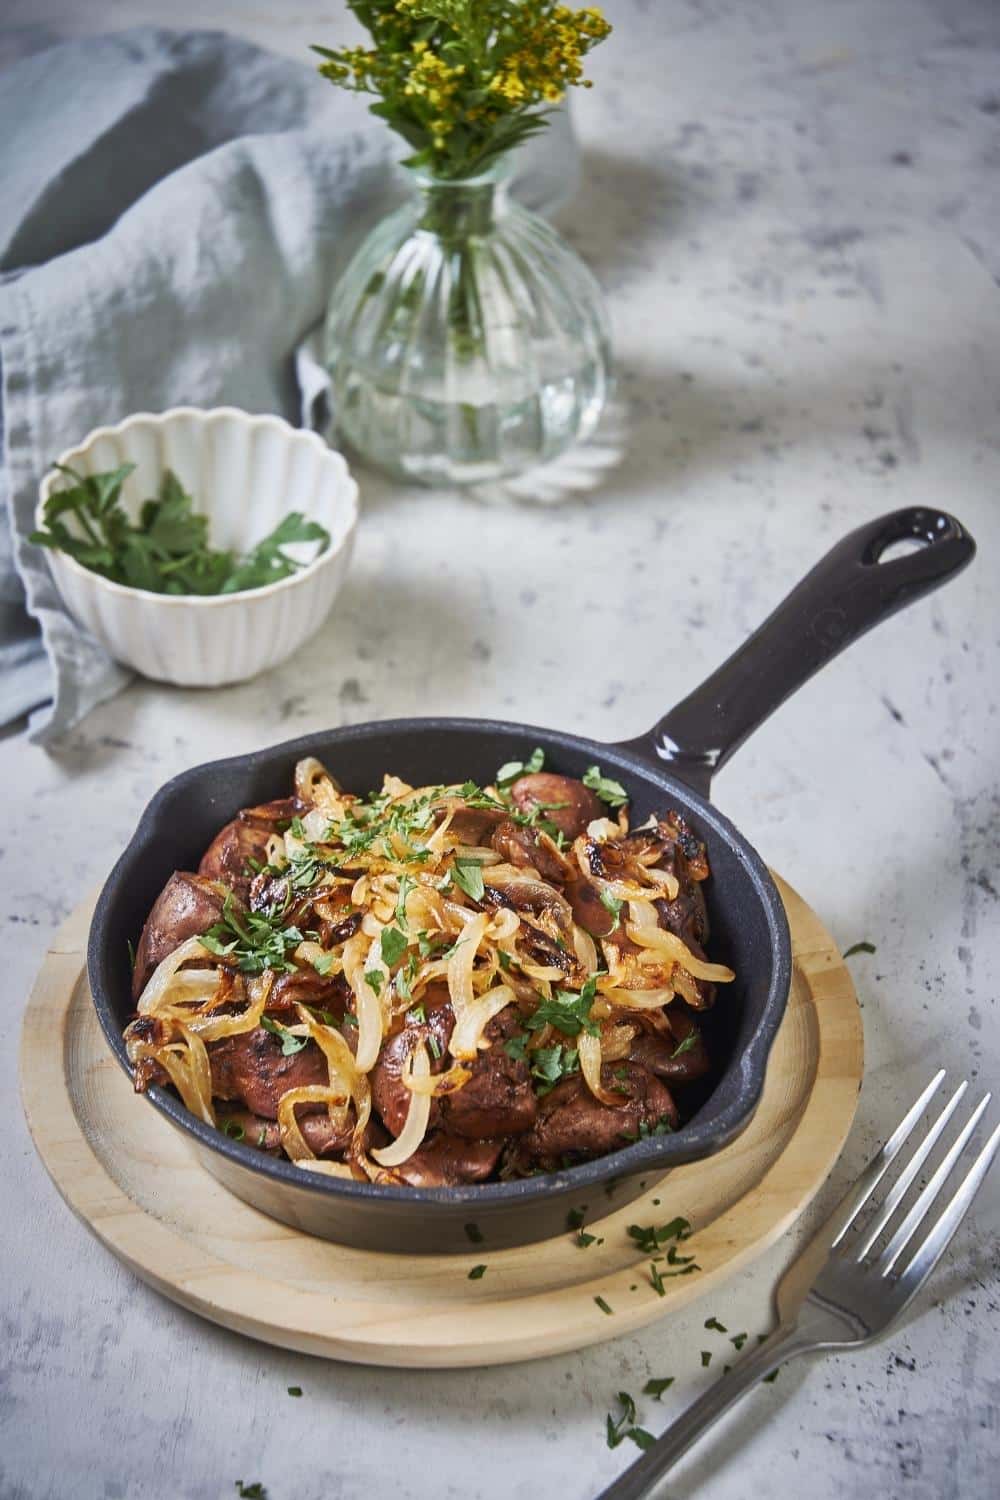 sauteed chicken livers and onions garnished with parsley in a small cast iron pan set on a wooden plate. A fork sits next to the pan and a tea towel, vase of flowers, and small bowl of parsley can be seen in the background.